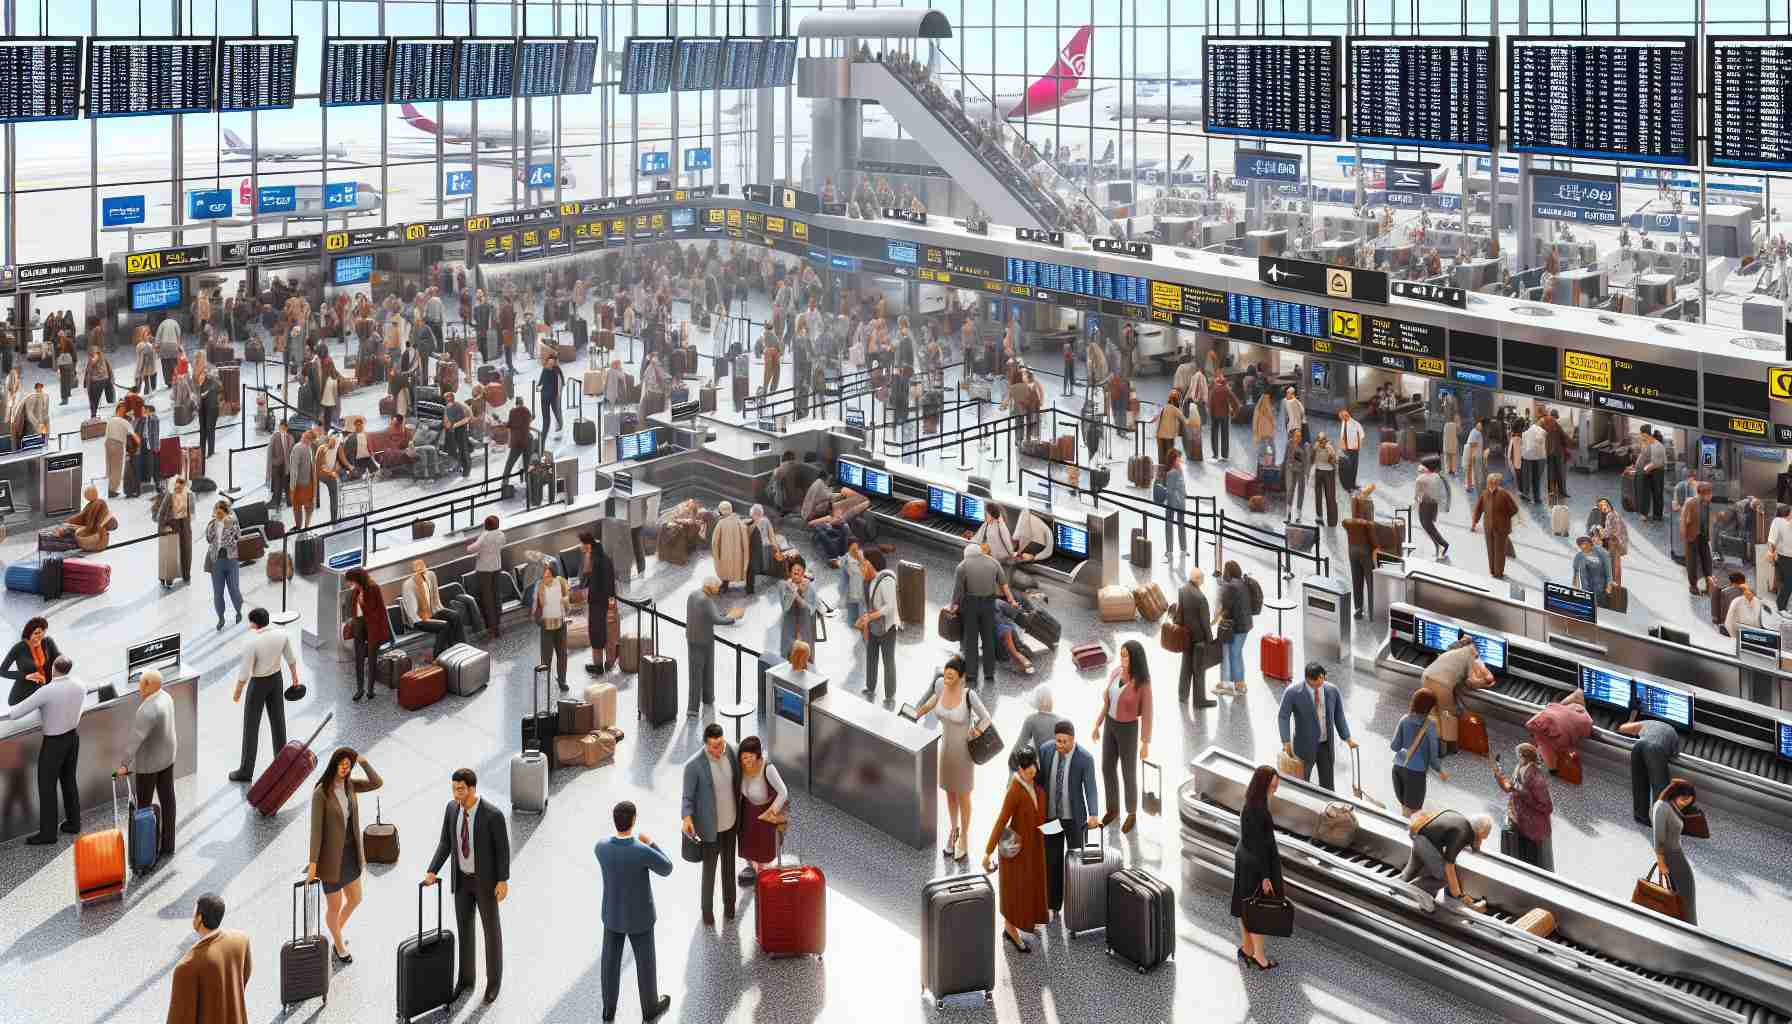 Realistic HD illustration depicting a busy international airport terminal in utter chaos due to a computer system failure. Numerous flustered passengers of various descents, including Asian, Caucasian, Middle-Eastern, and Hispanic, are seen trying to understand the situation. Airport staff, both male and female, are shown attempting to manually check-in luggage and handle boarding processes. Screens usually displaying flight information are blank or flashing error messages in various languages. Luggage is scattered across the floor near the check-in counters due to the absence of conveyor belt movement. Overall, the aura of confusion and frustration lingers heavily in the air.